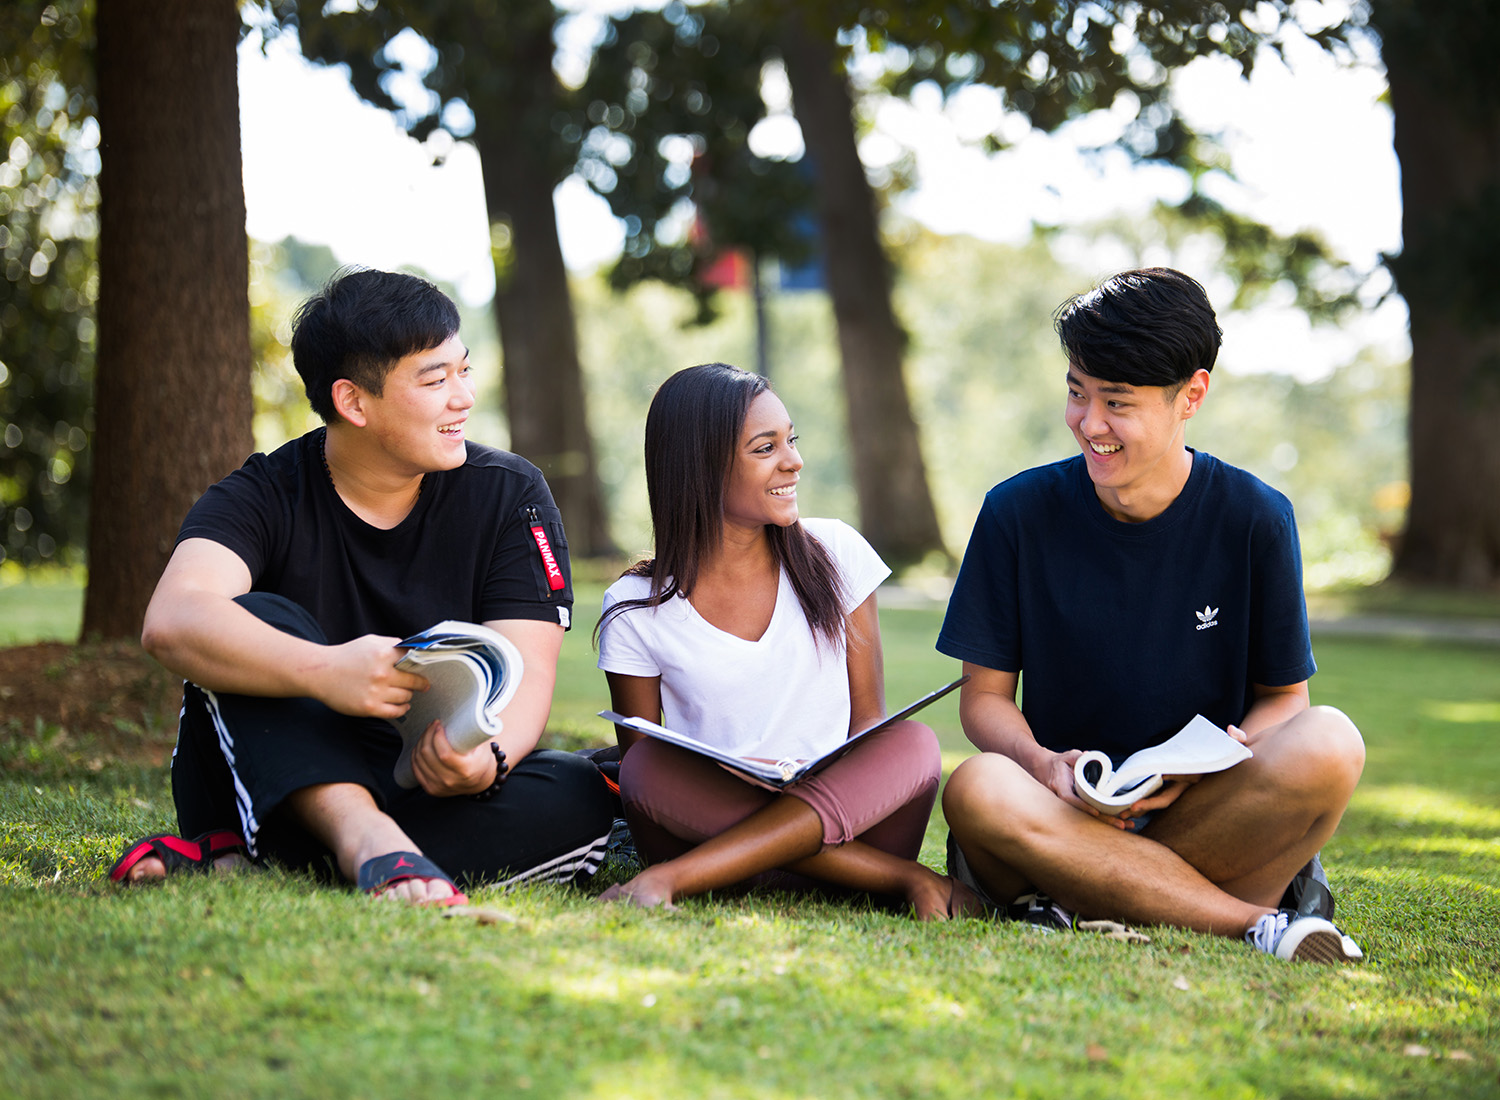 Three students sitting in the grass talking and smiling.